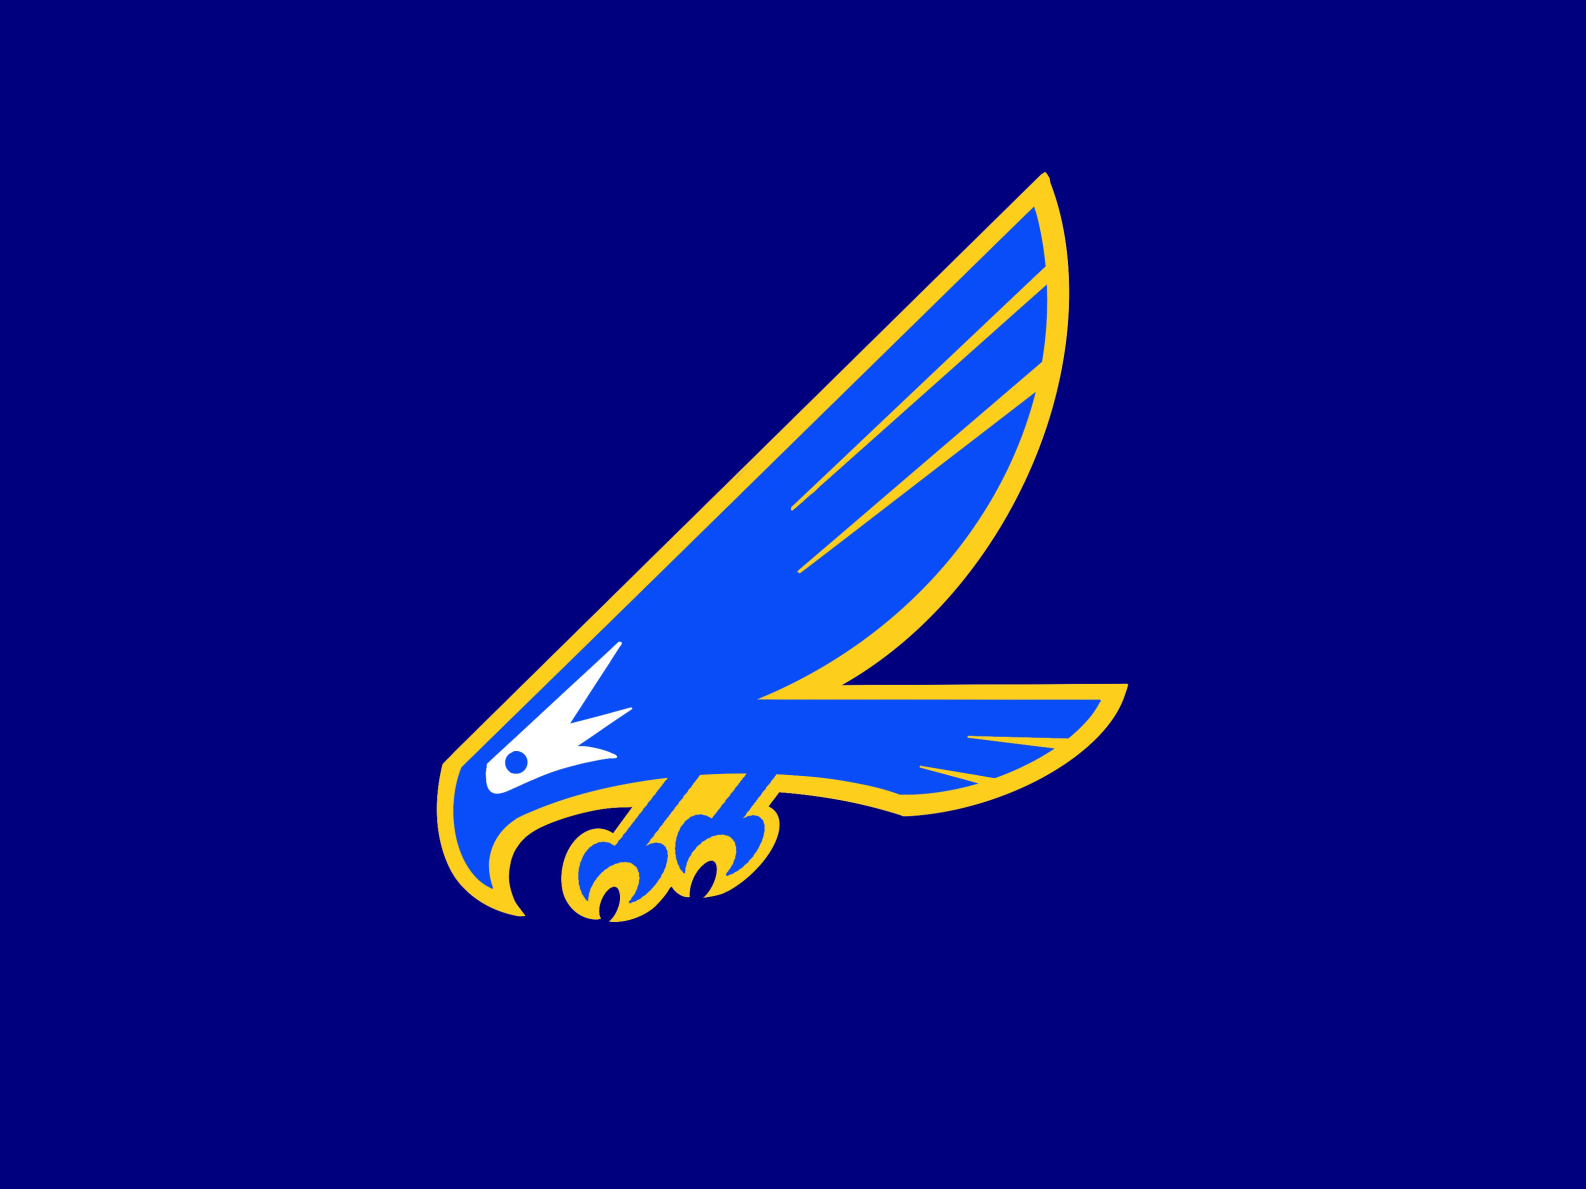 Asbury Elementary Eagles by Jeremy Grant on Dribbble